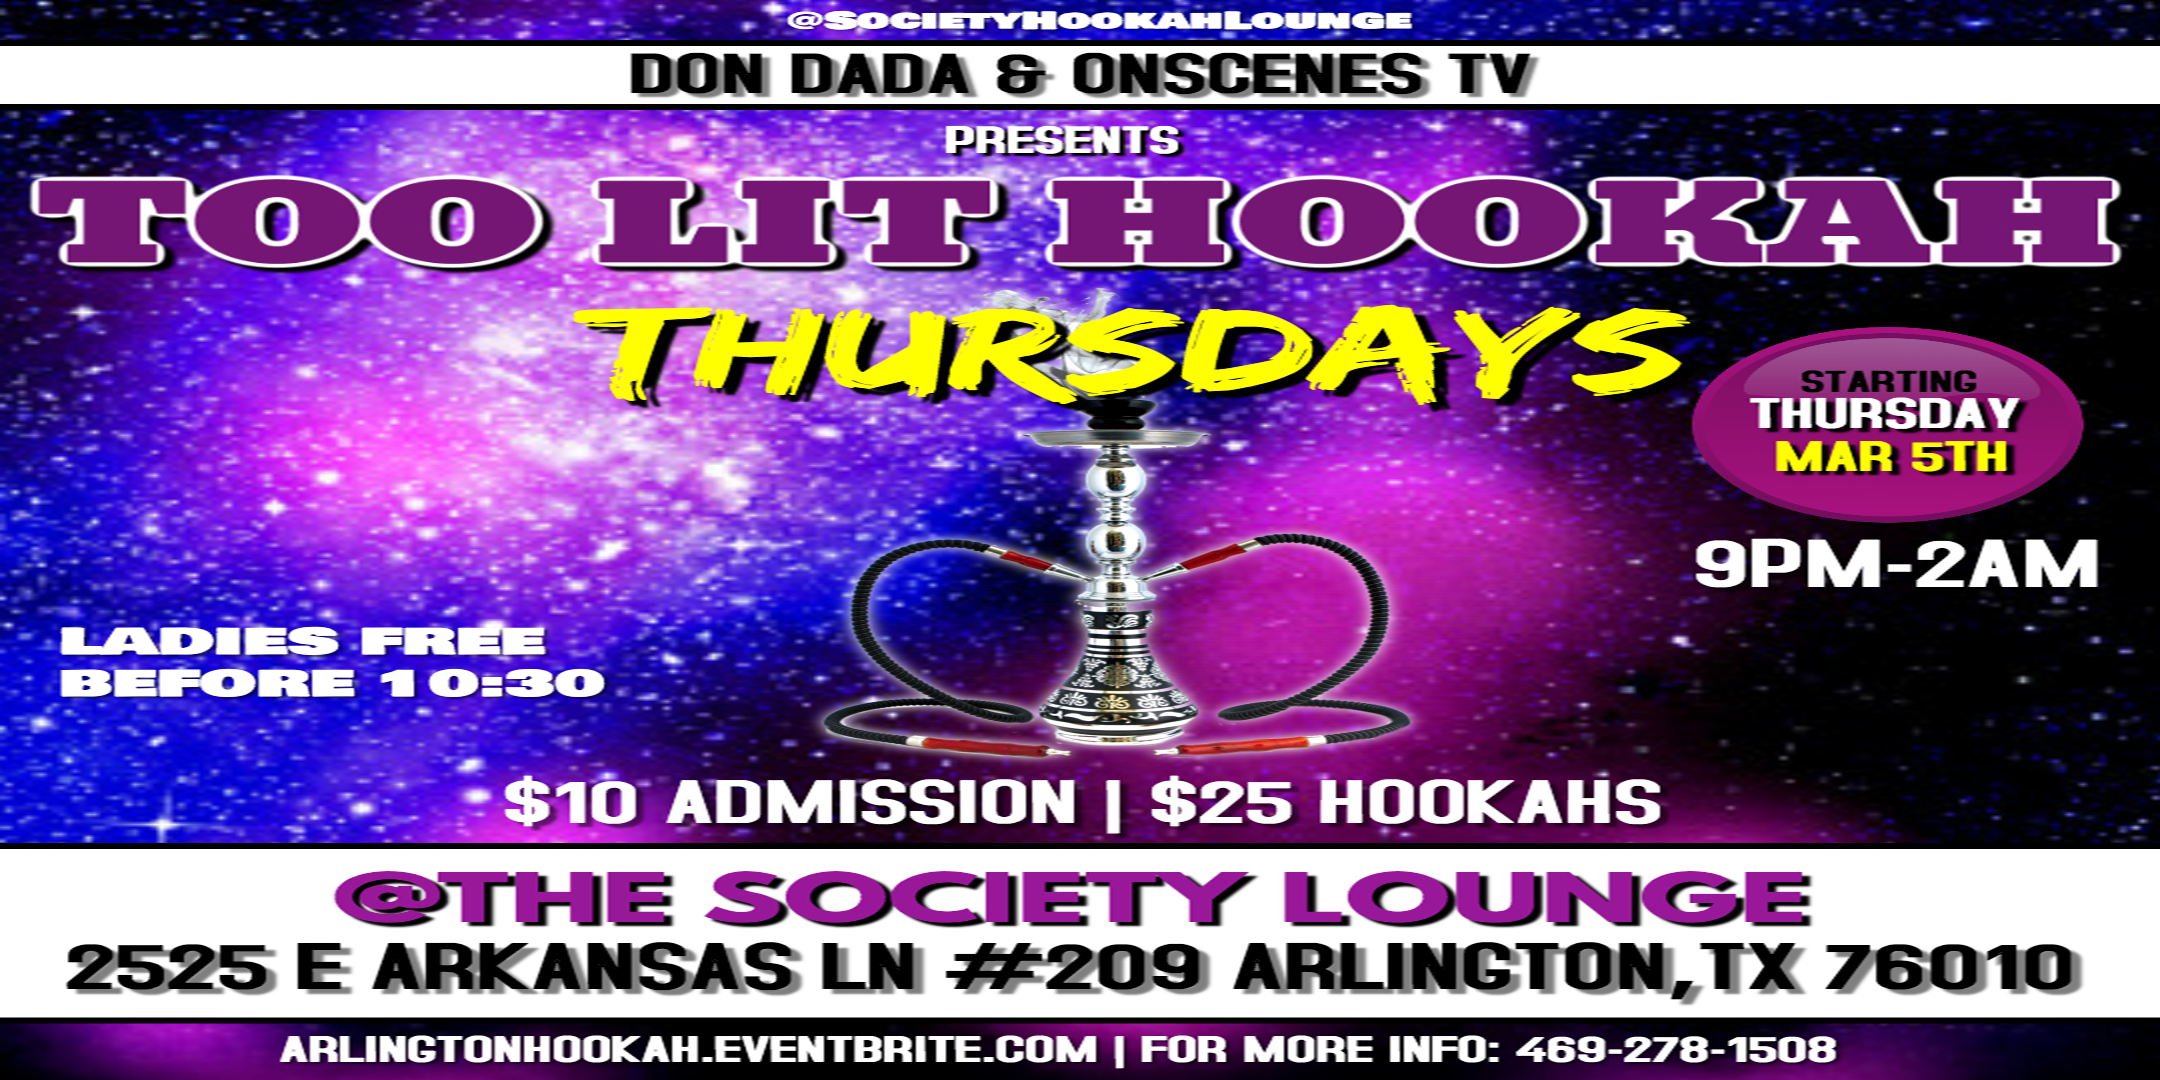 #2LitThursdays DFW HOOKAH NIGHT - FREE ADMISSION WITH RSVP